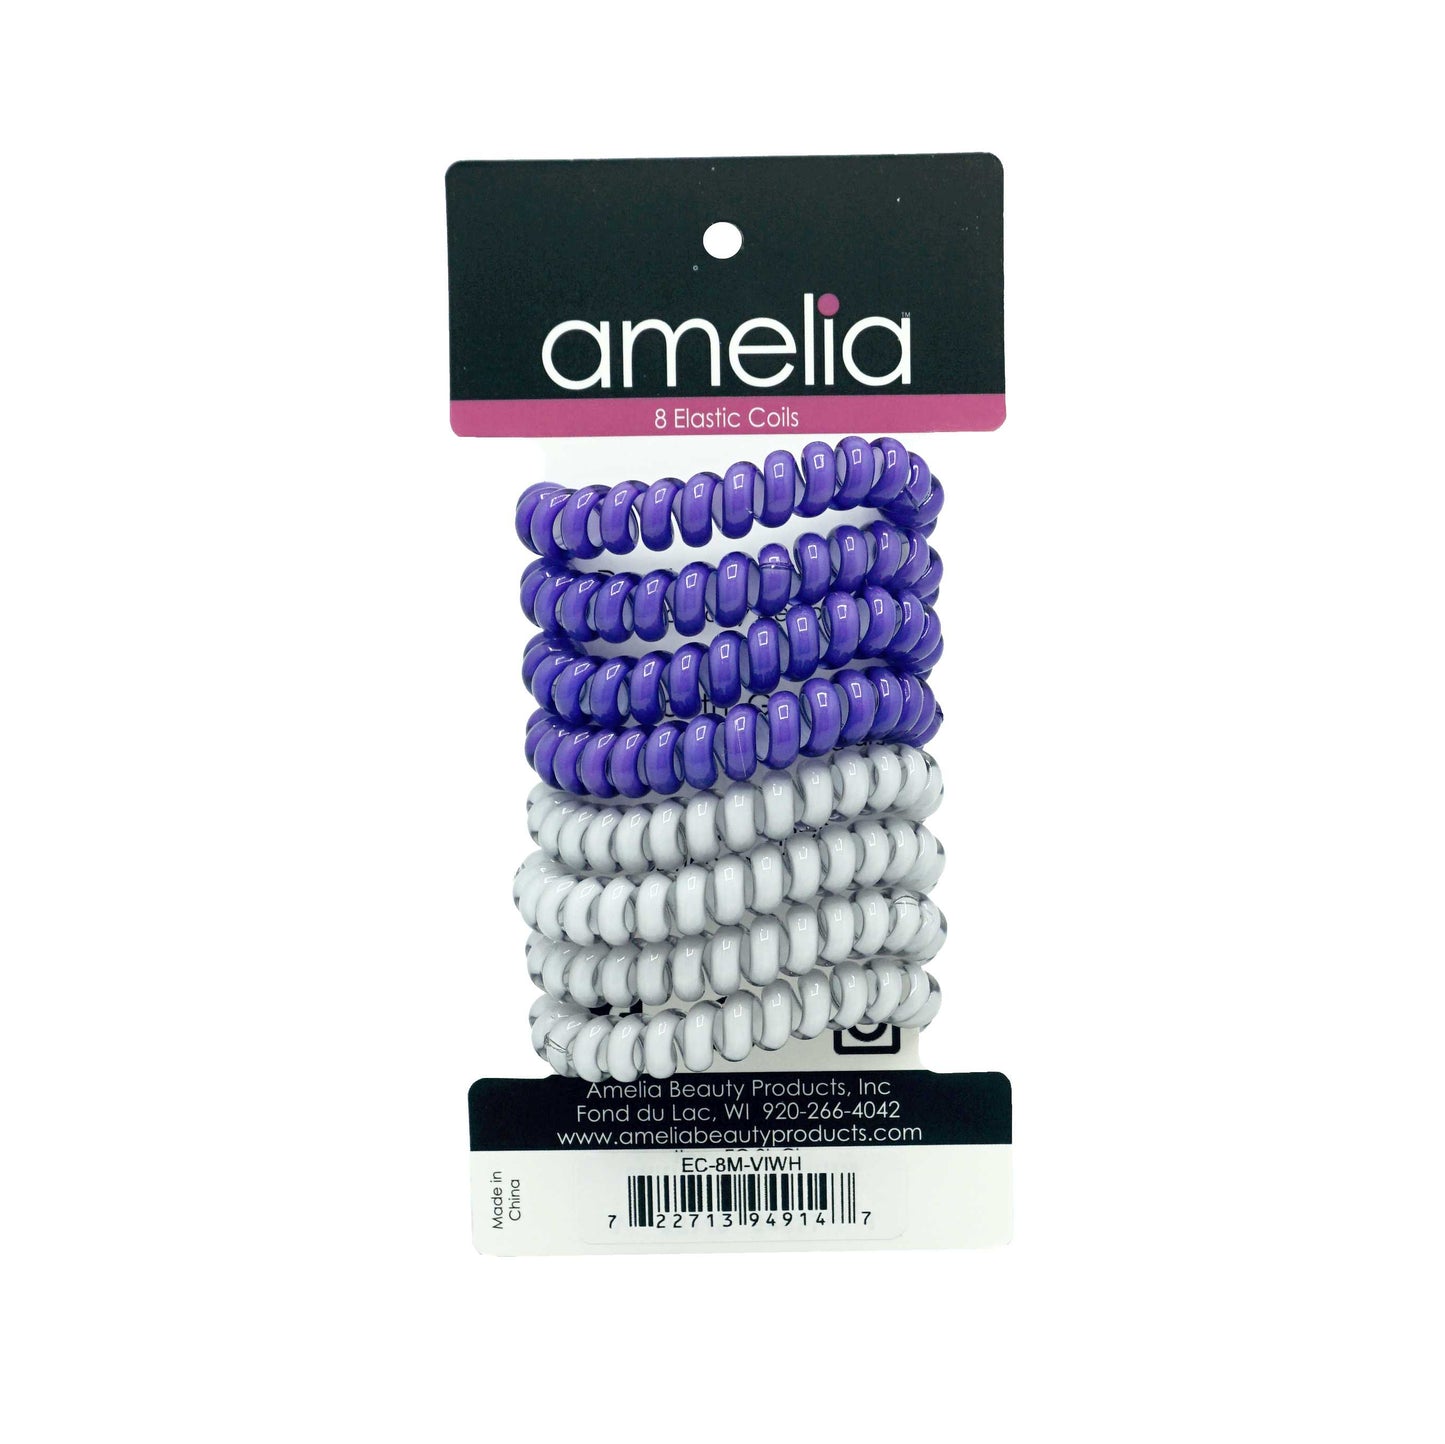 Amelia Beauty Products 8 Medium Elastic Hair Coils, 2.0in Diameter Thick Spiral Hair Ties, Gentle on Hair, Strong Hold and Minimizes Dents and Creases, Violet and White Mix